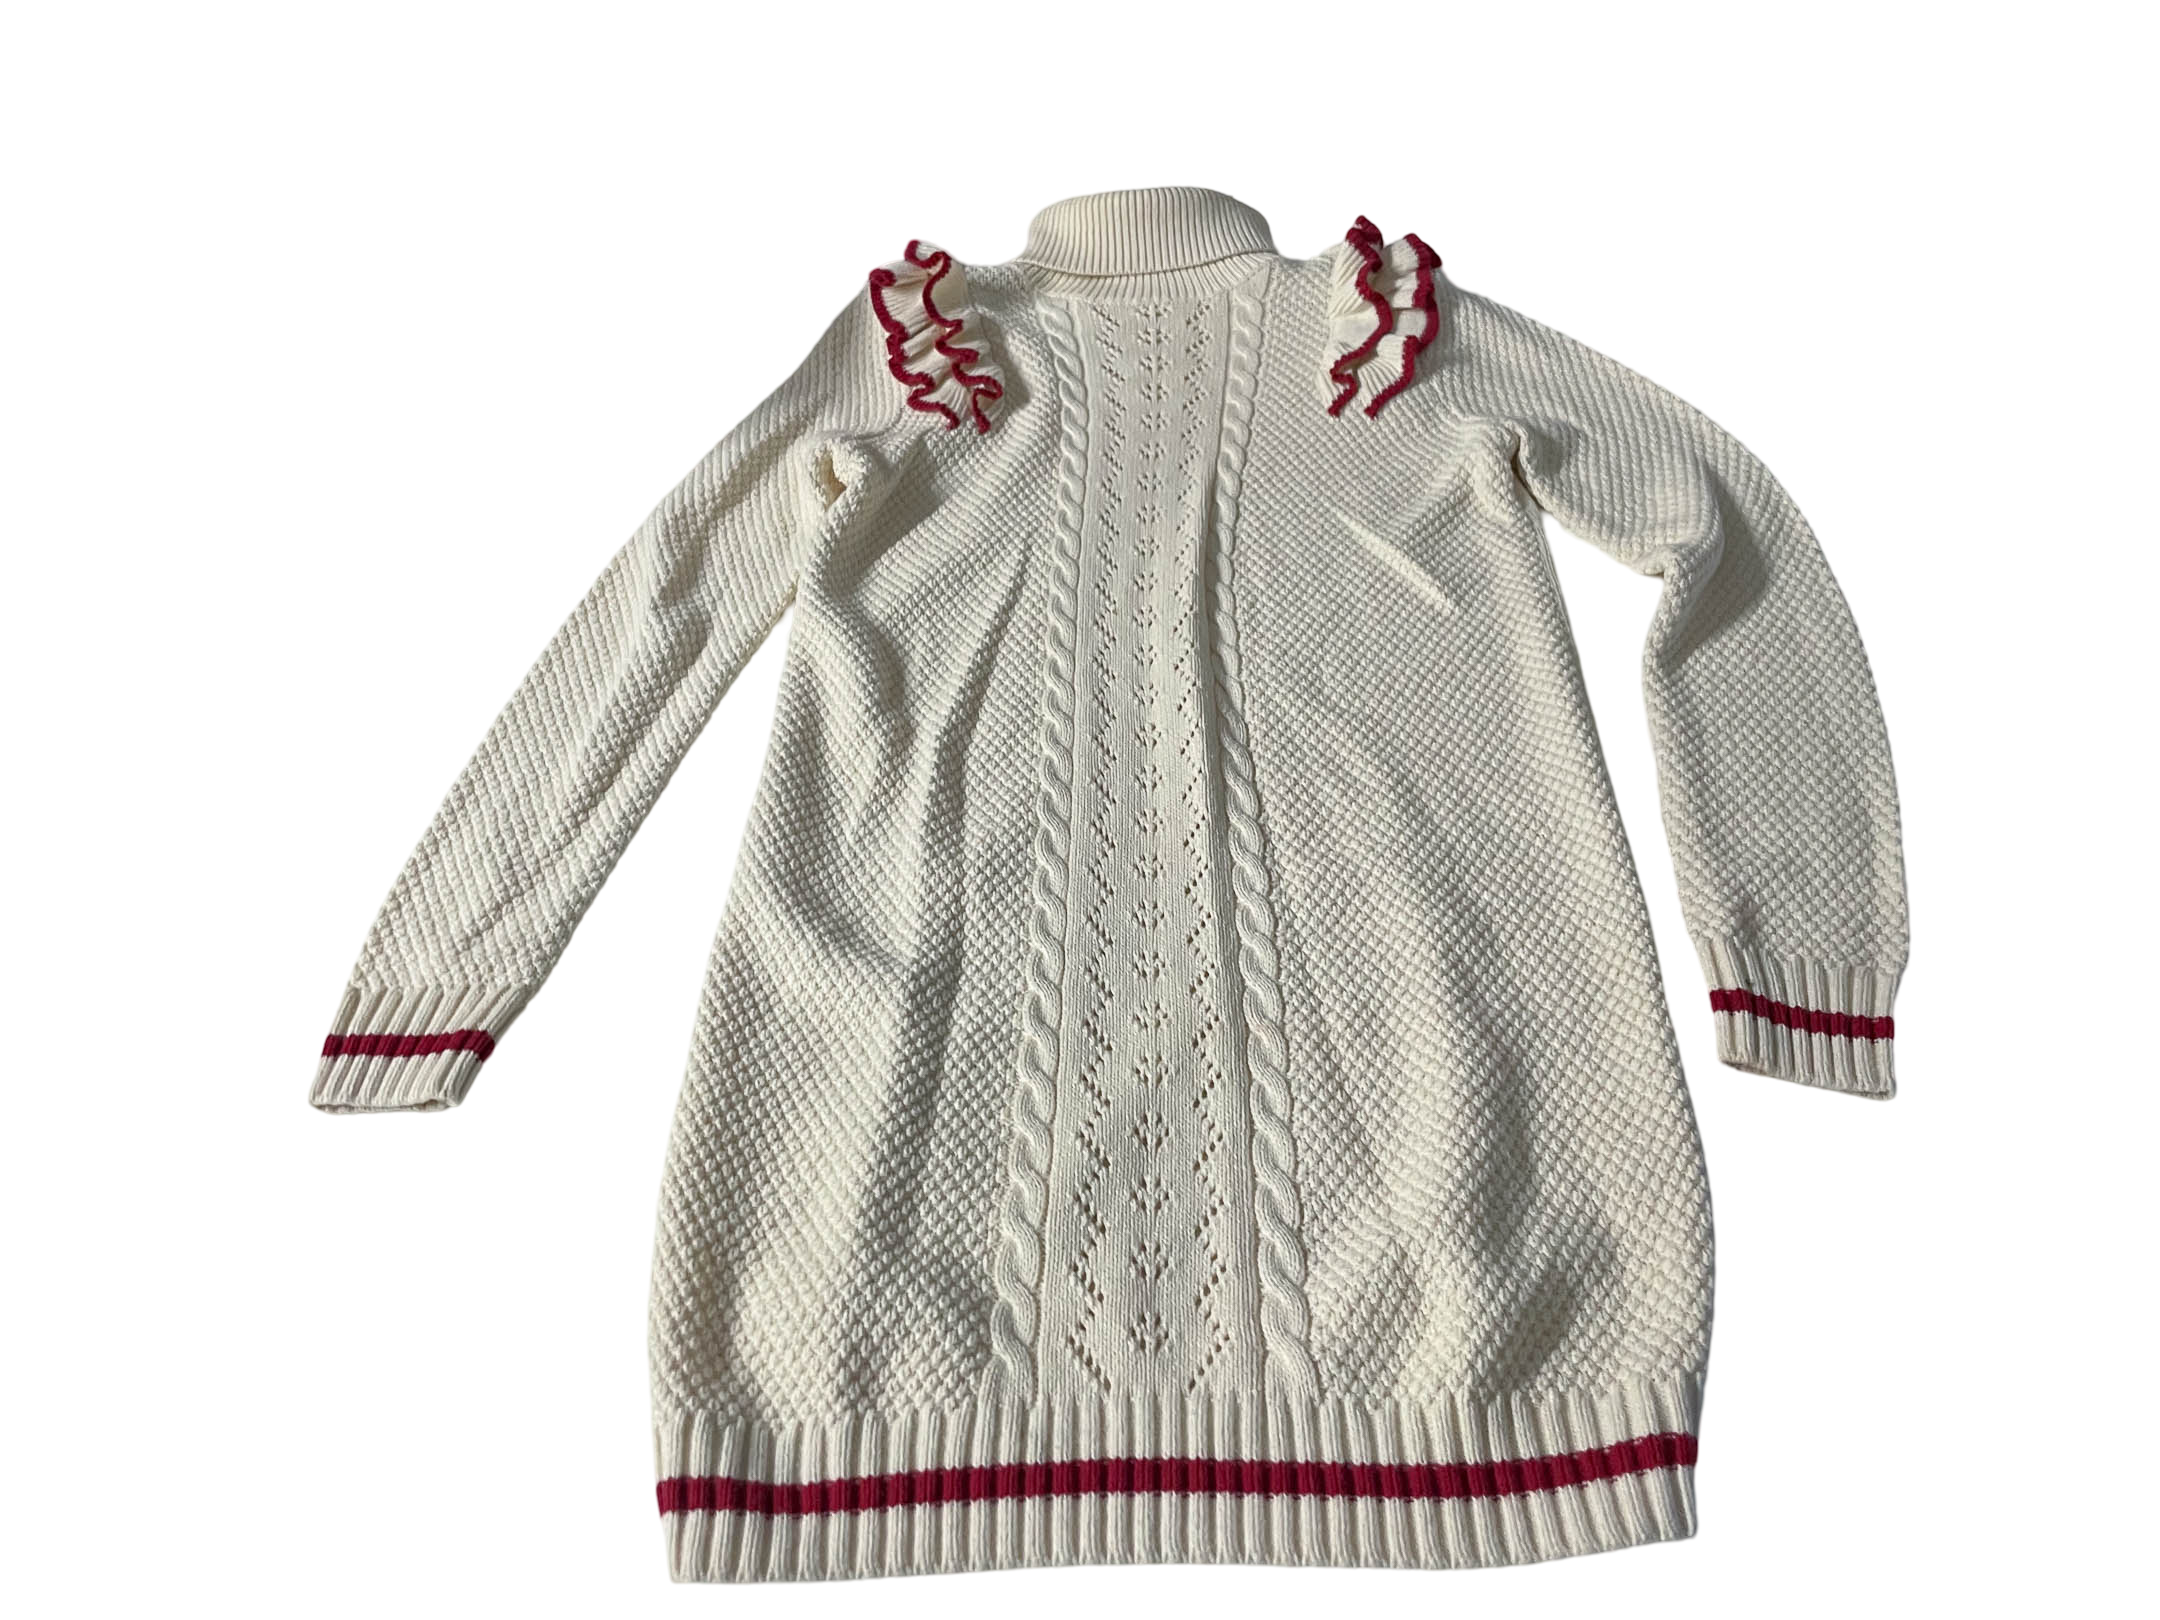 Vintage Next cream girl knitted collared sweater dress 11-12YRS|L34 W16| Made in Myanmar| SKU 4035